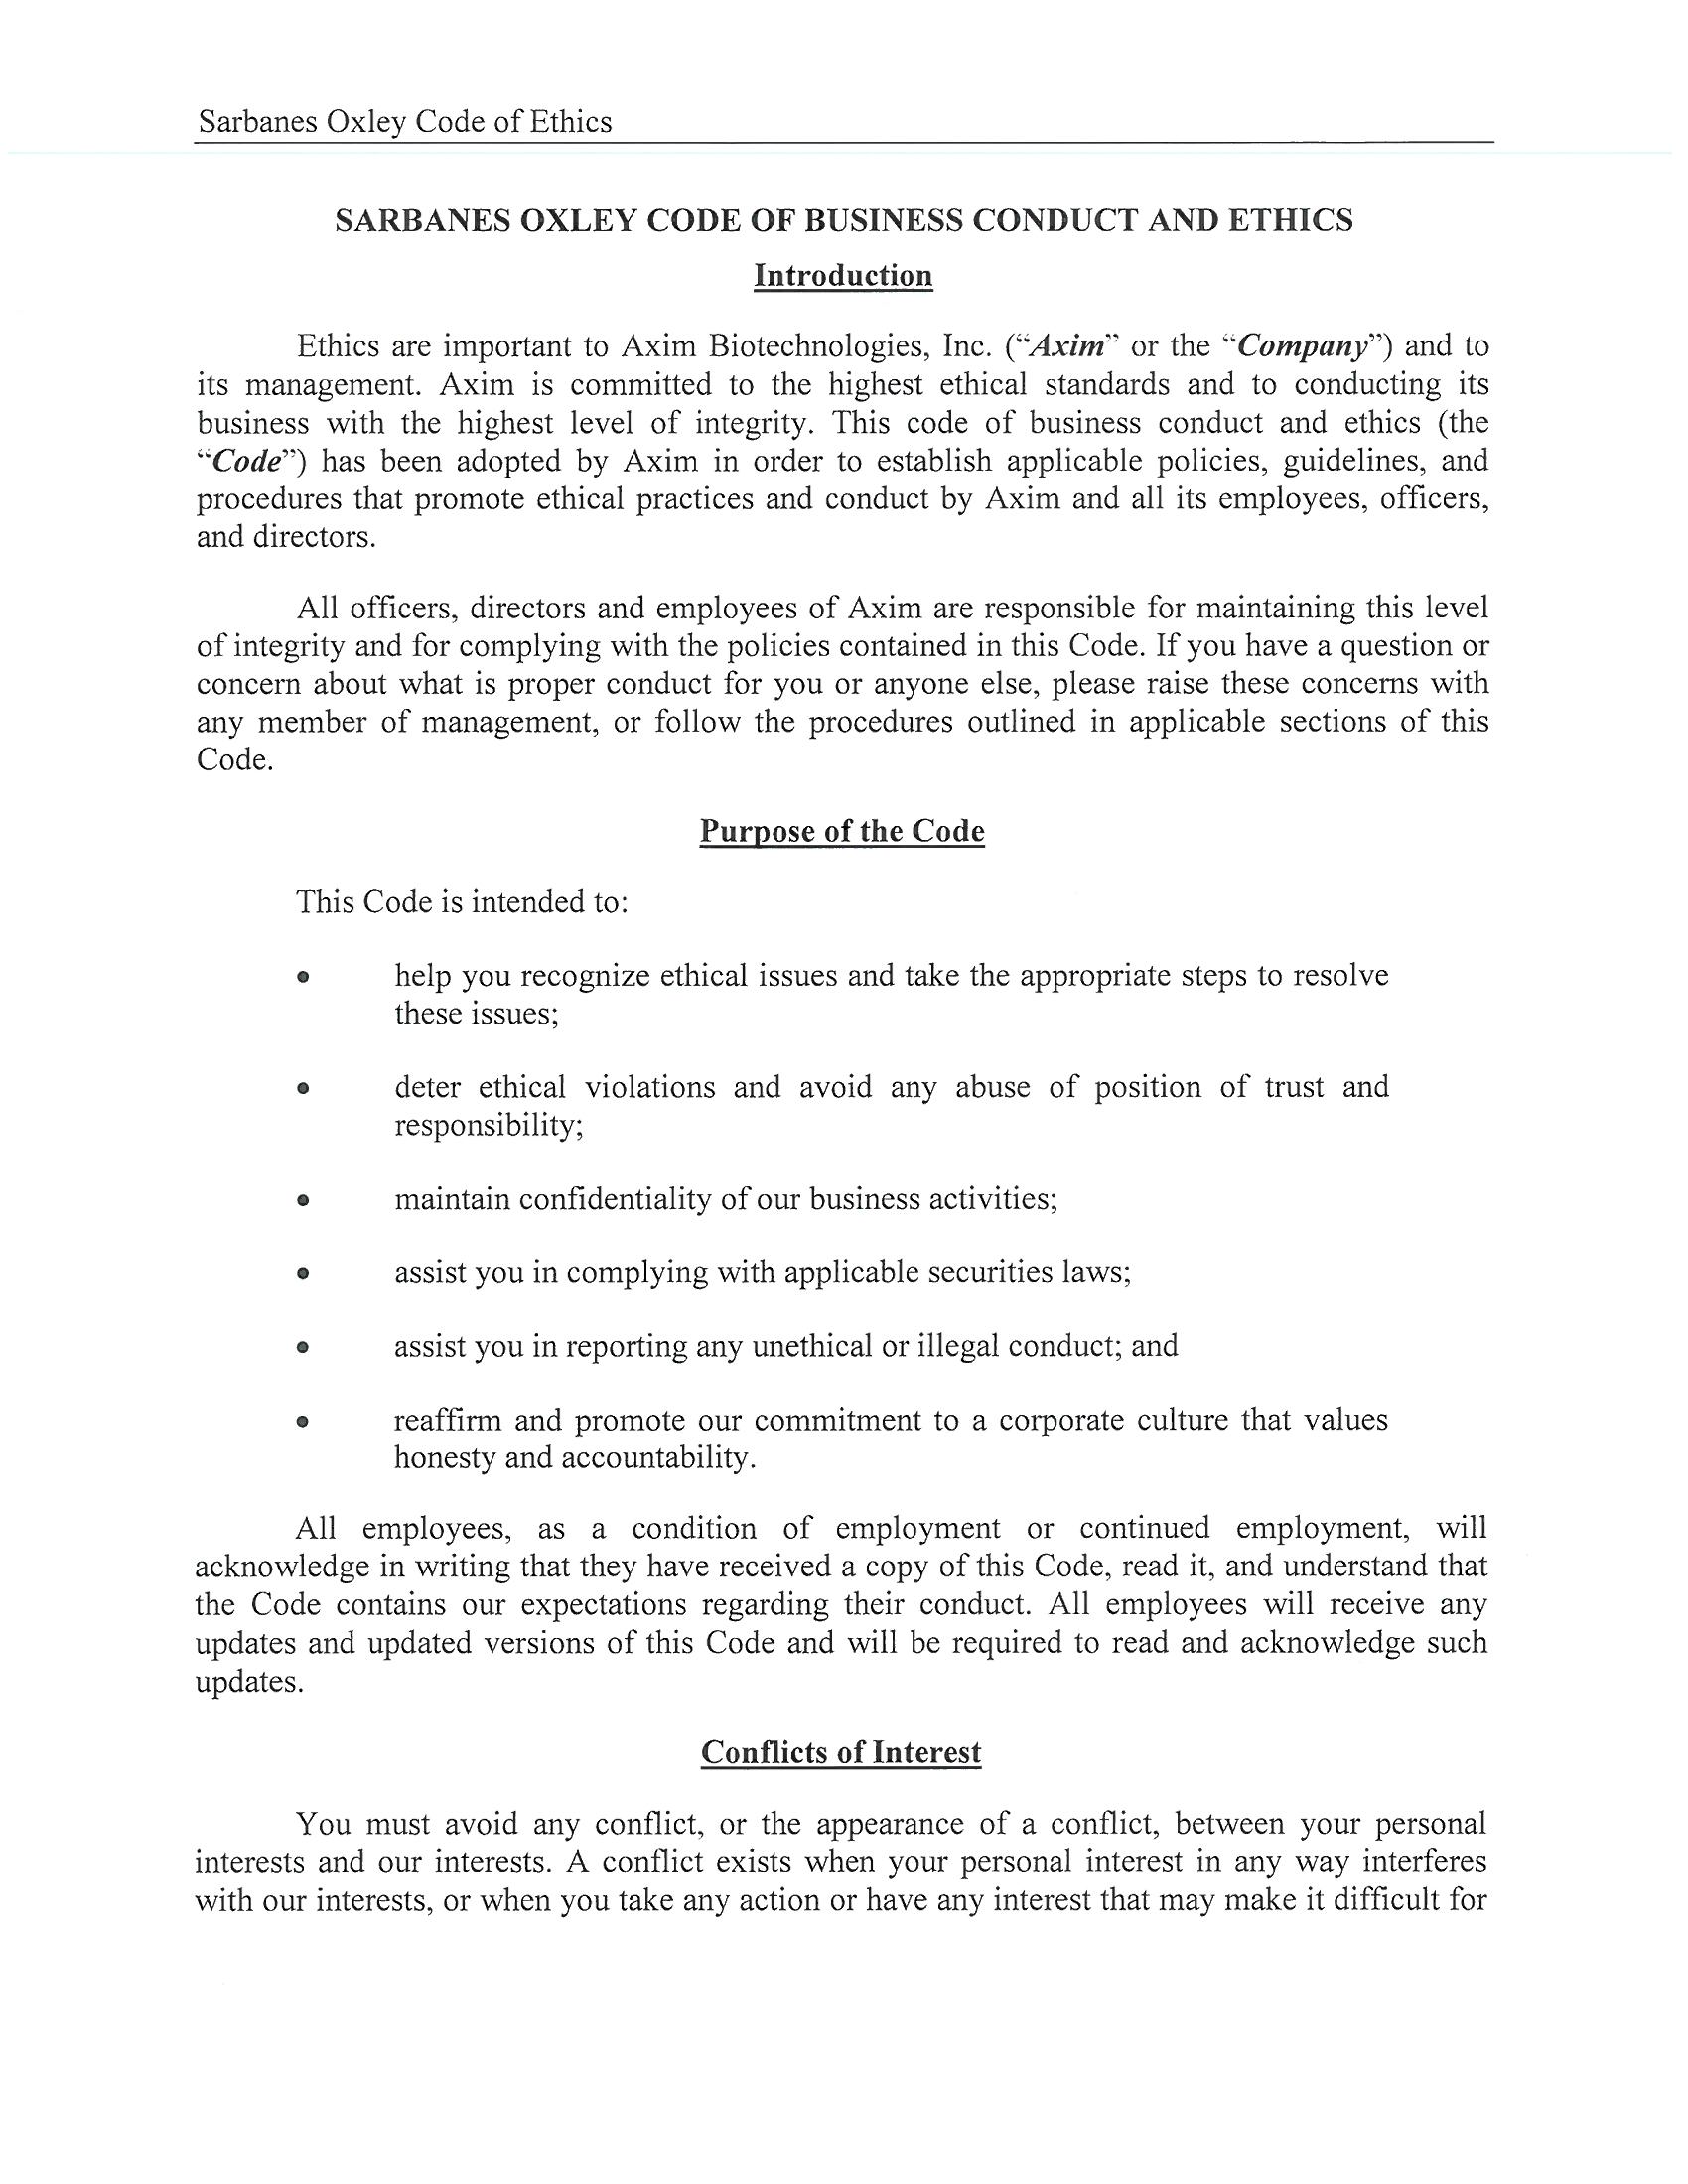 14.1 Code of Business Conduct and Ethics_Page_3.jpg